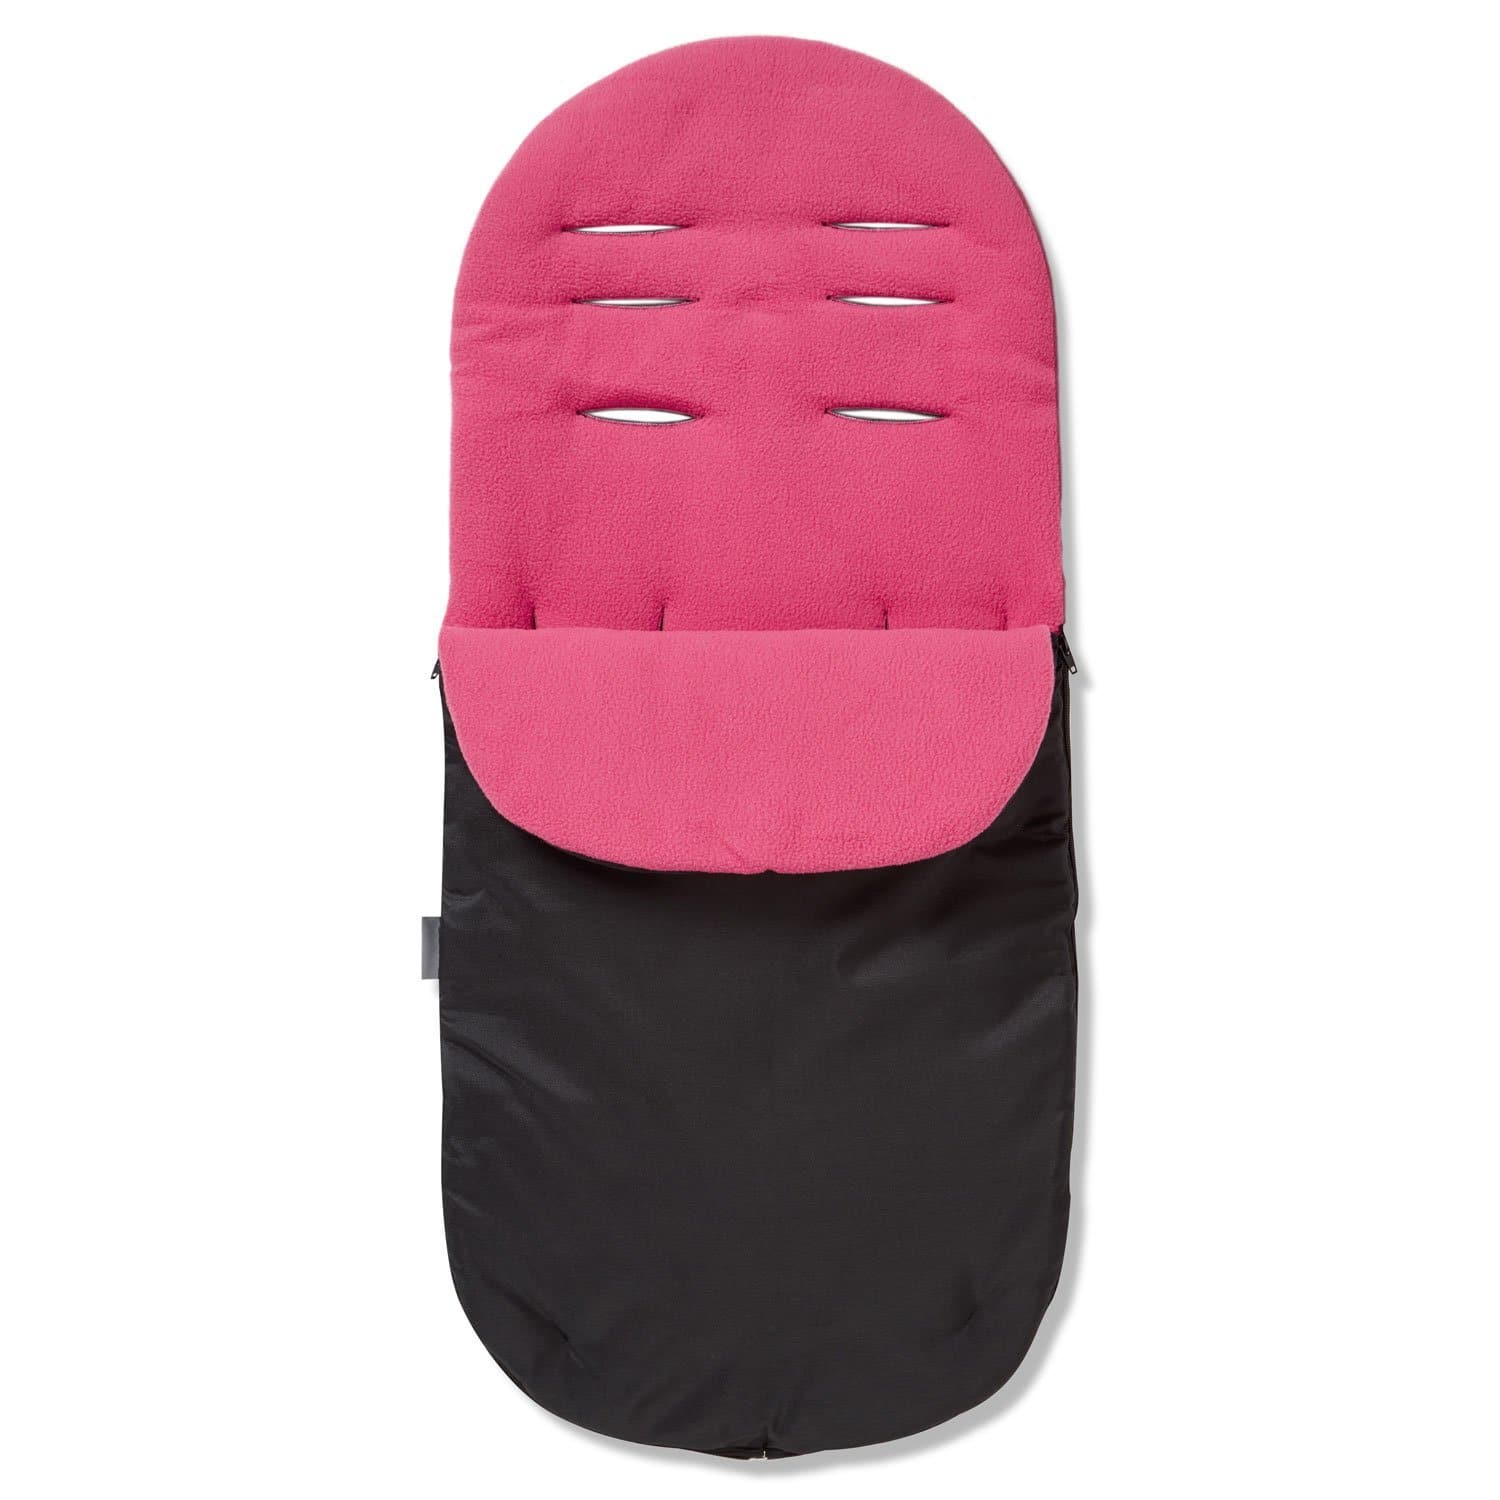 Footmuff / Cosy Toes Compatible with Bloom - Dark Pink / Fits All Models | For Your Little One